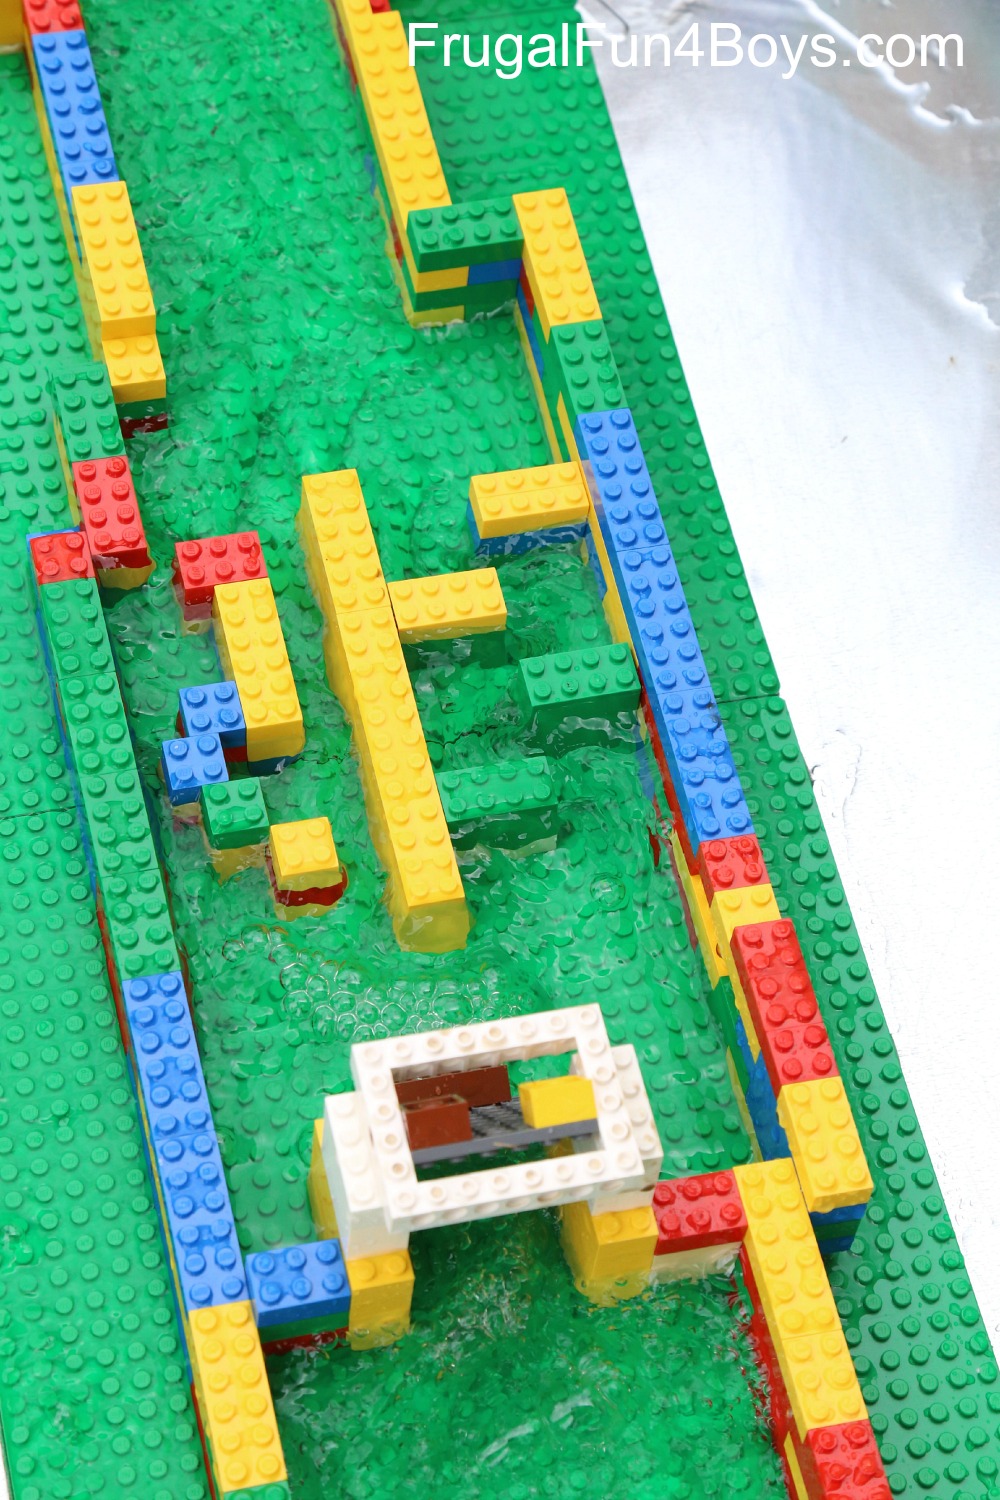 Engineering for Kids: Build a LEGO Water Wheel